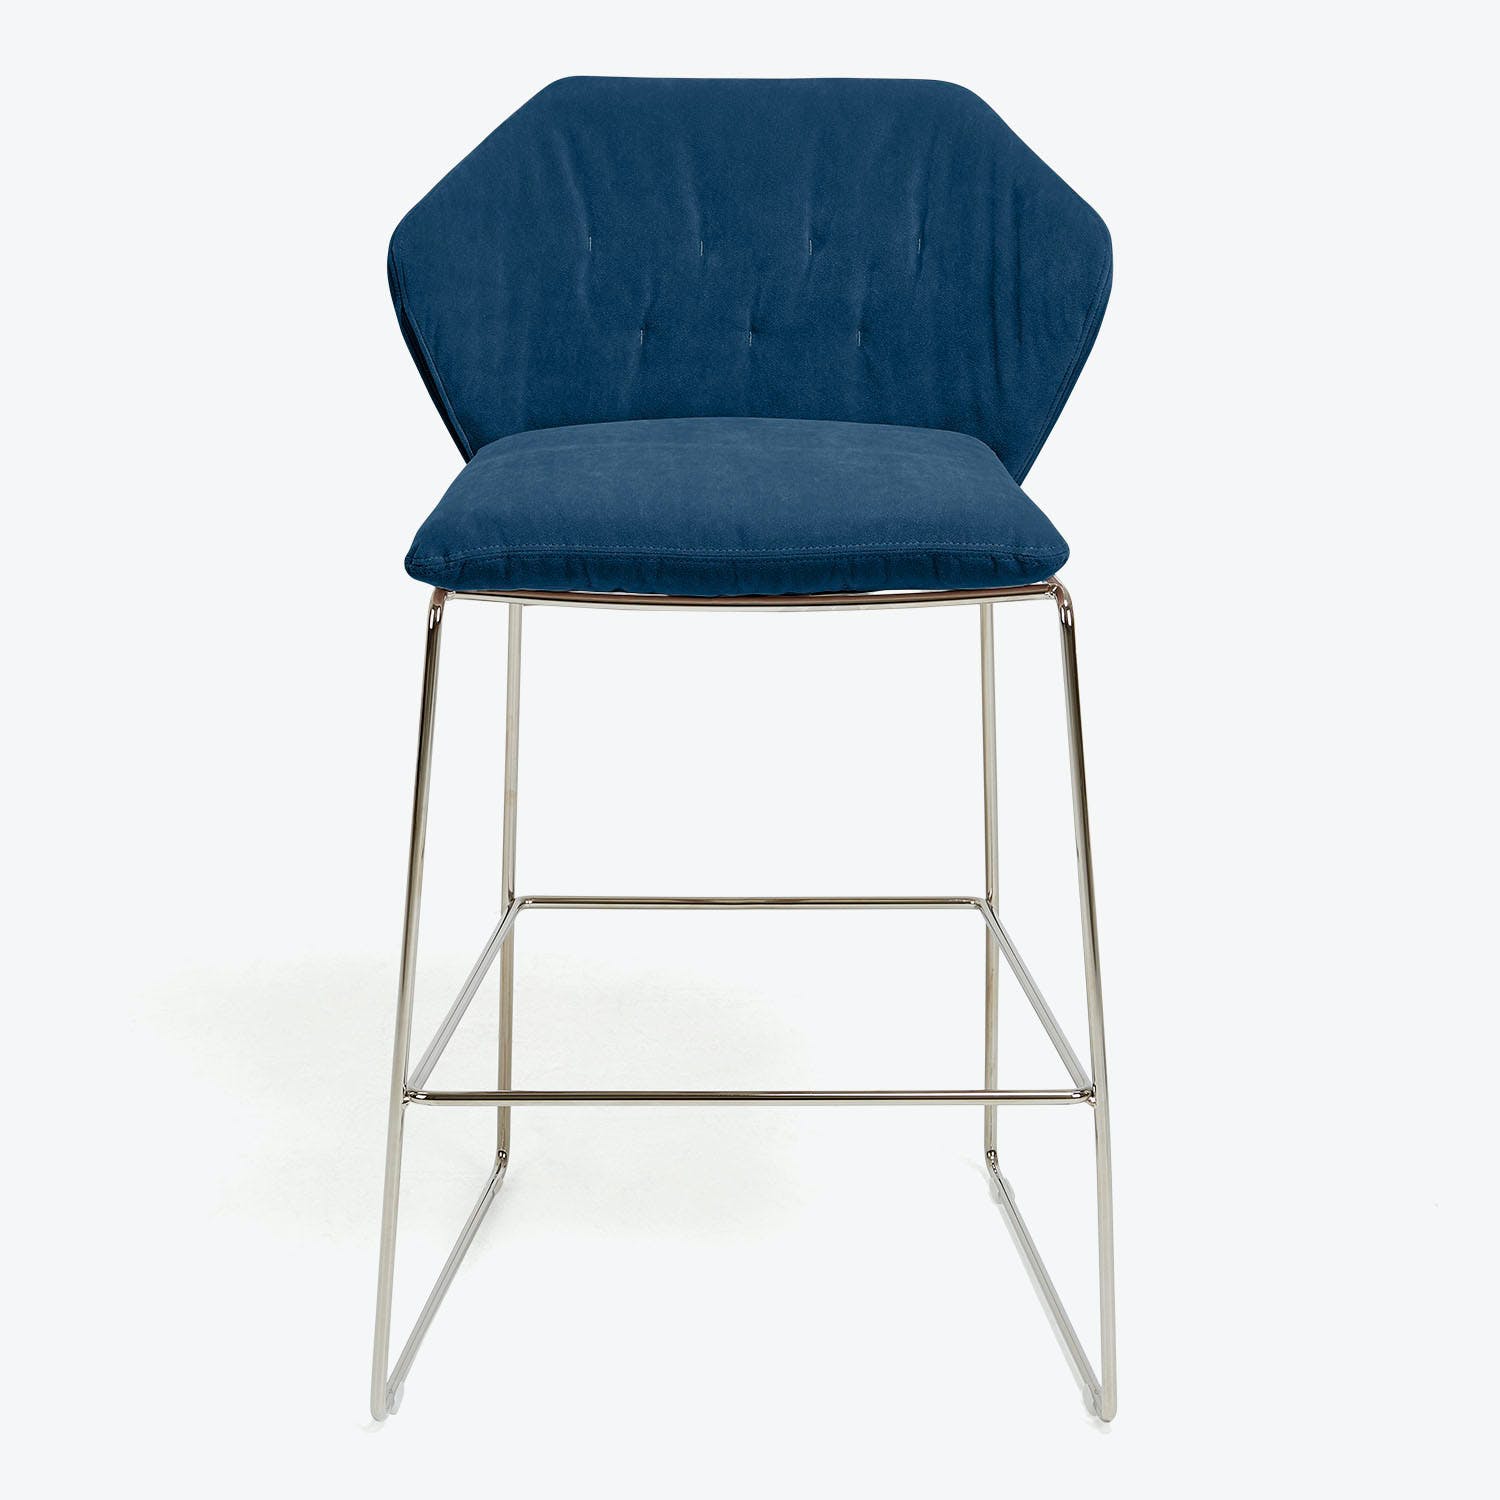 Contemporary bar stool with blue upholstery and chrome frame.